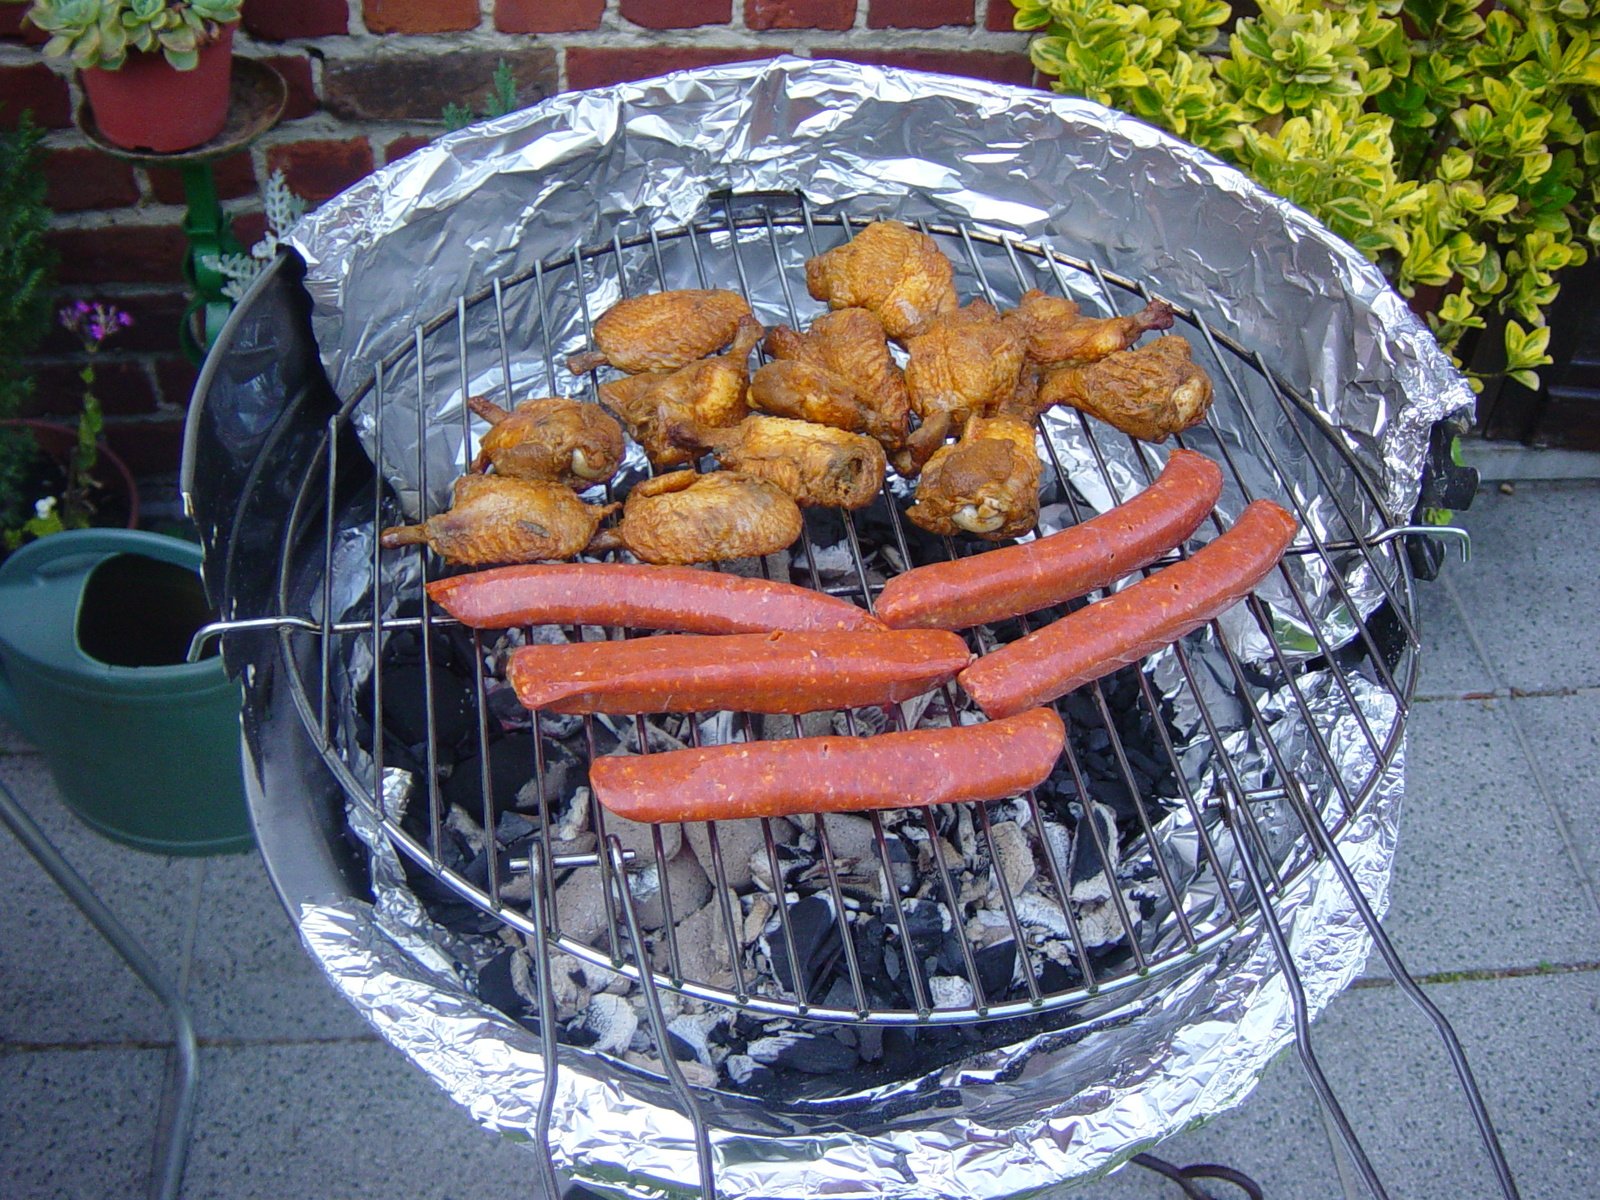 grilled  dogs, rolls, and onions cooking on an outdoor charcoal grill